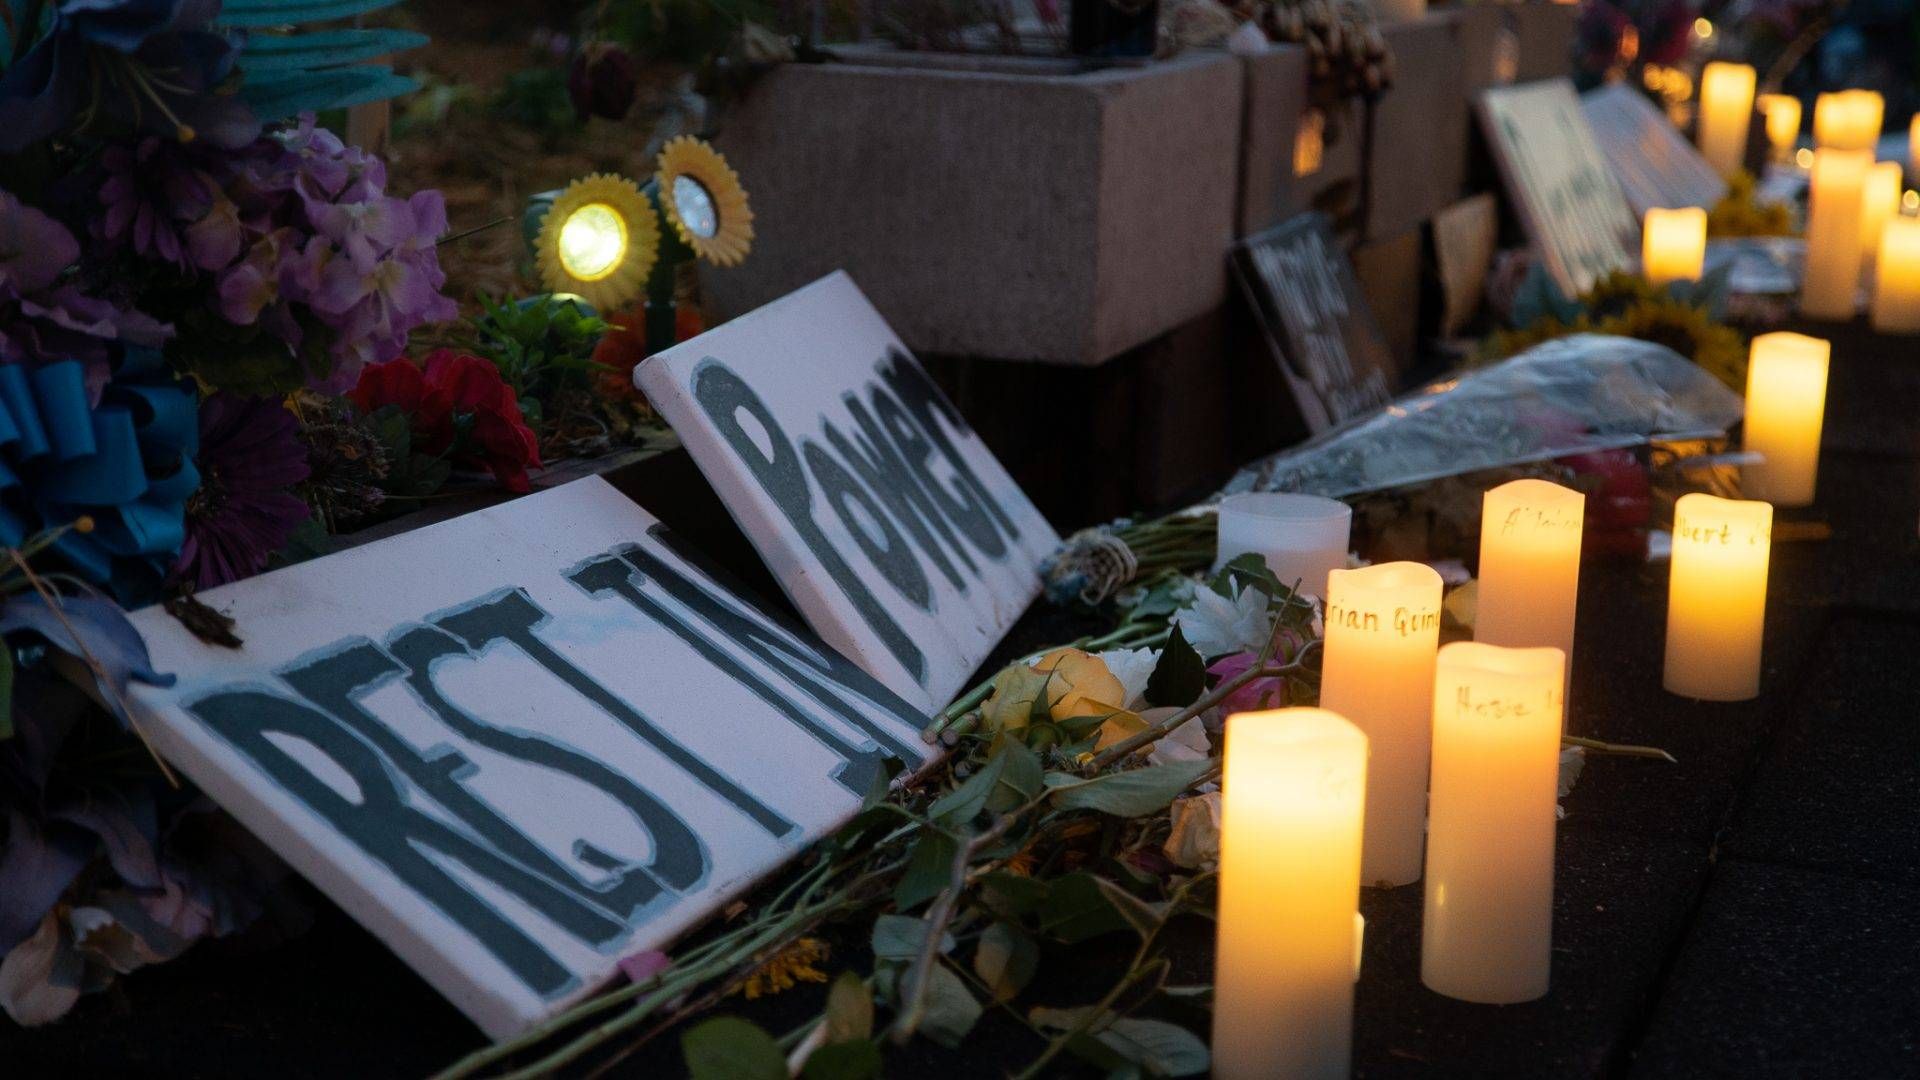 A sign reading "rest in power" is surrounded by flowers, candlelights and offerings. The nonprofit George Floyd Global Memorial has collected thousands of similar offerings.